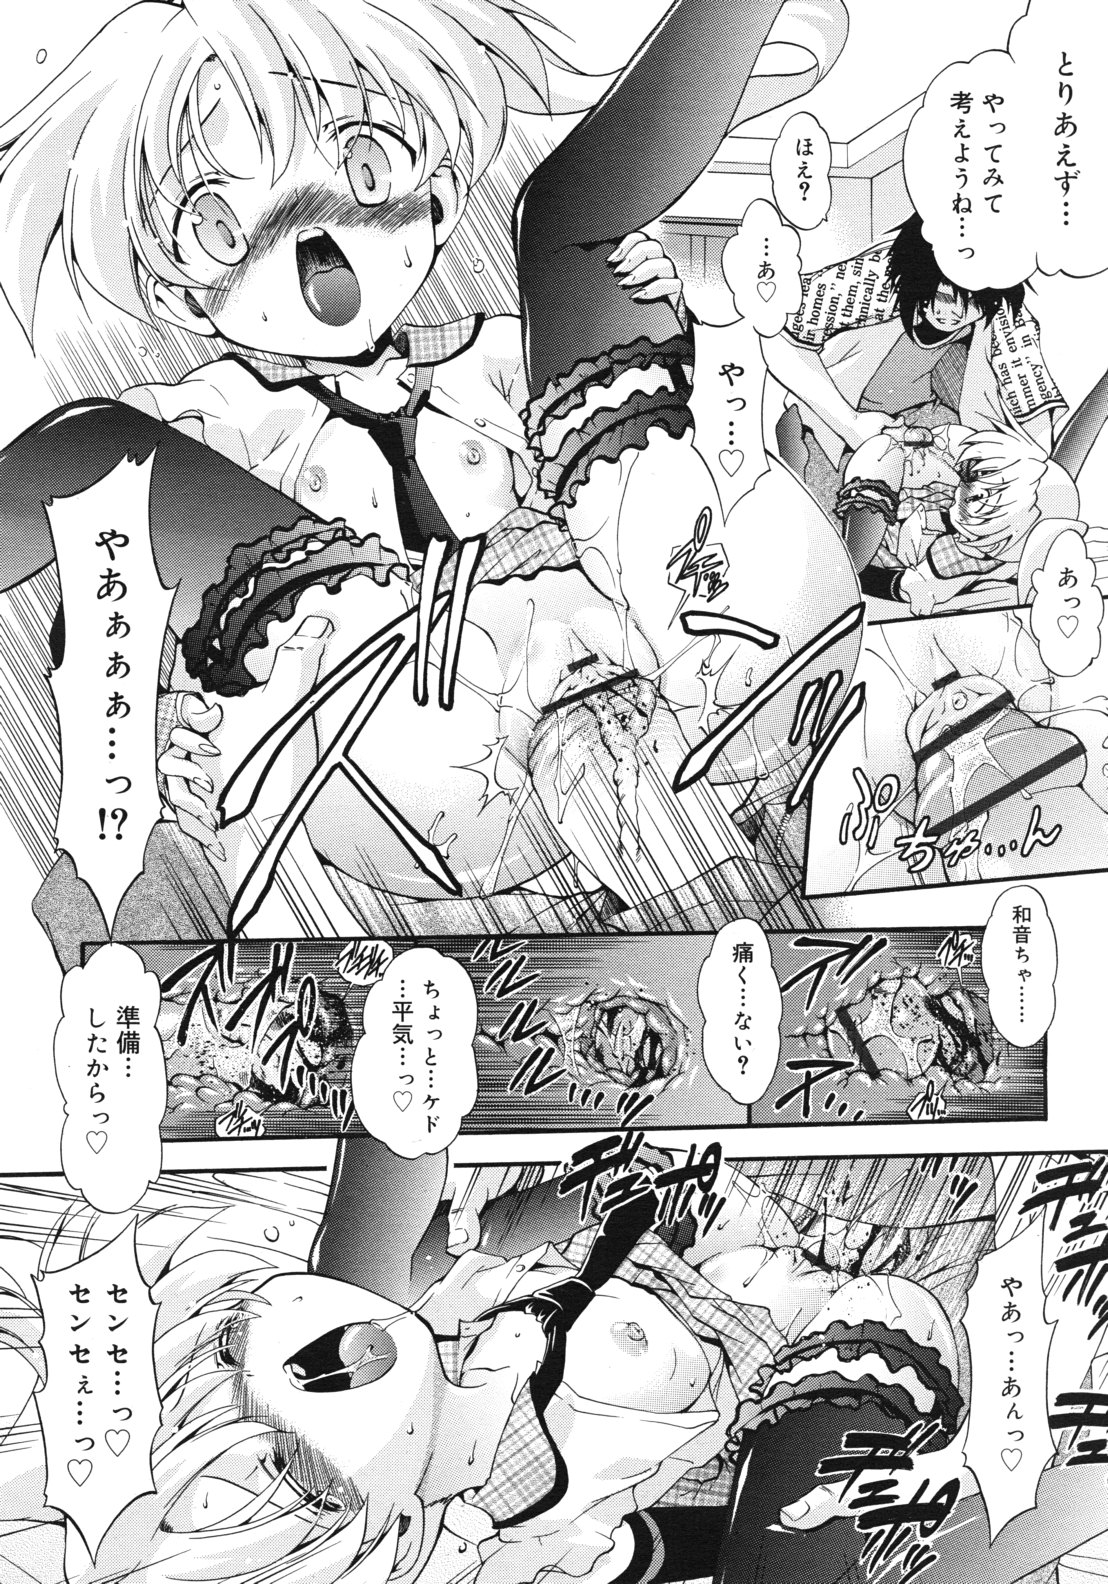 COMIC RiN 2012-02 page 42 full